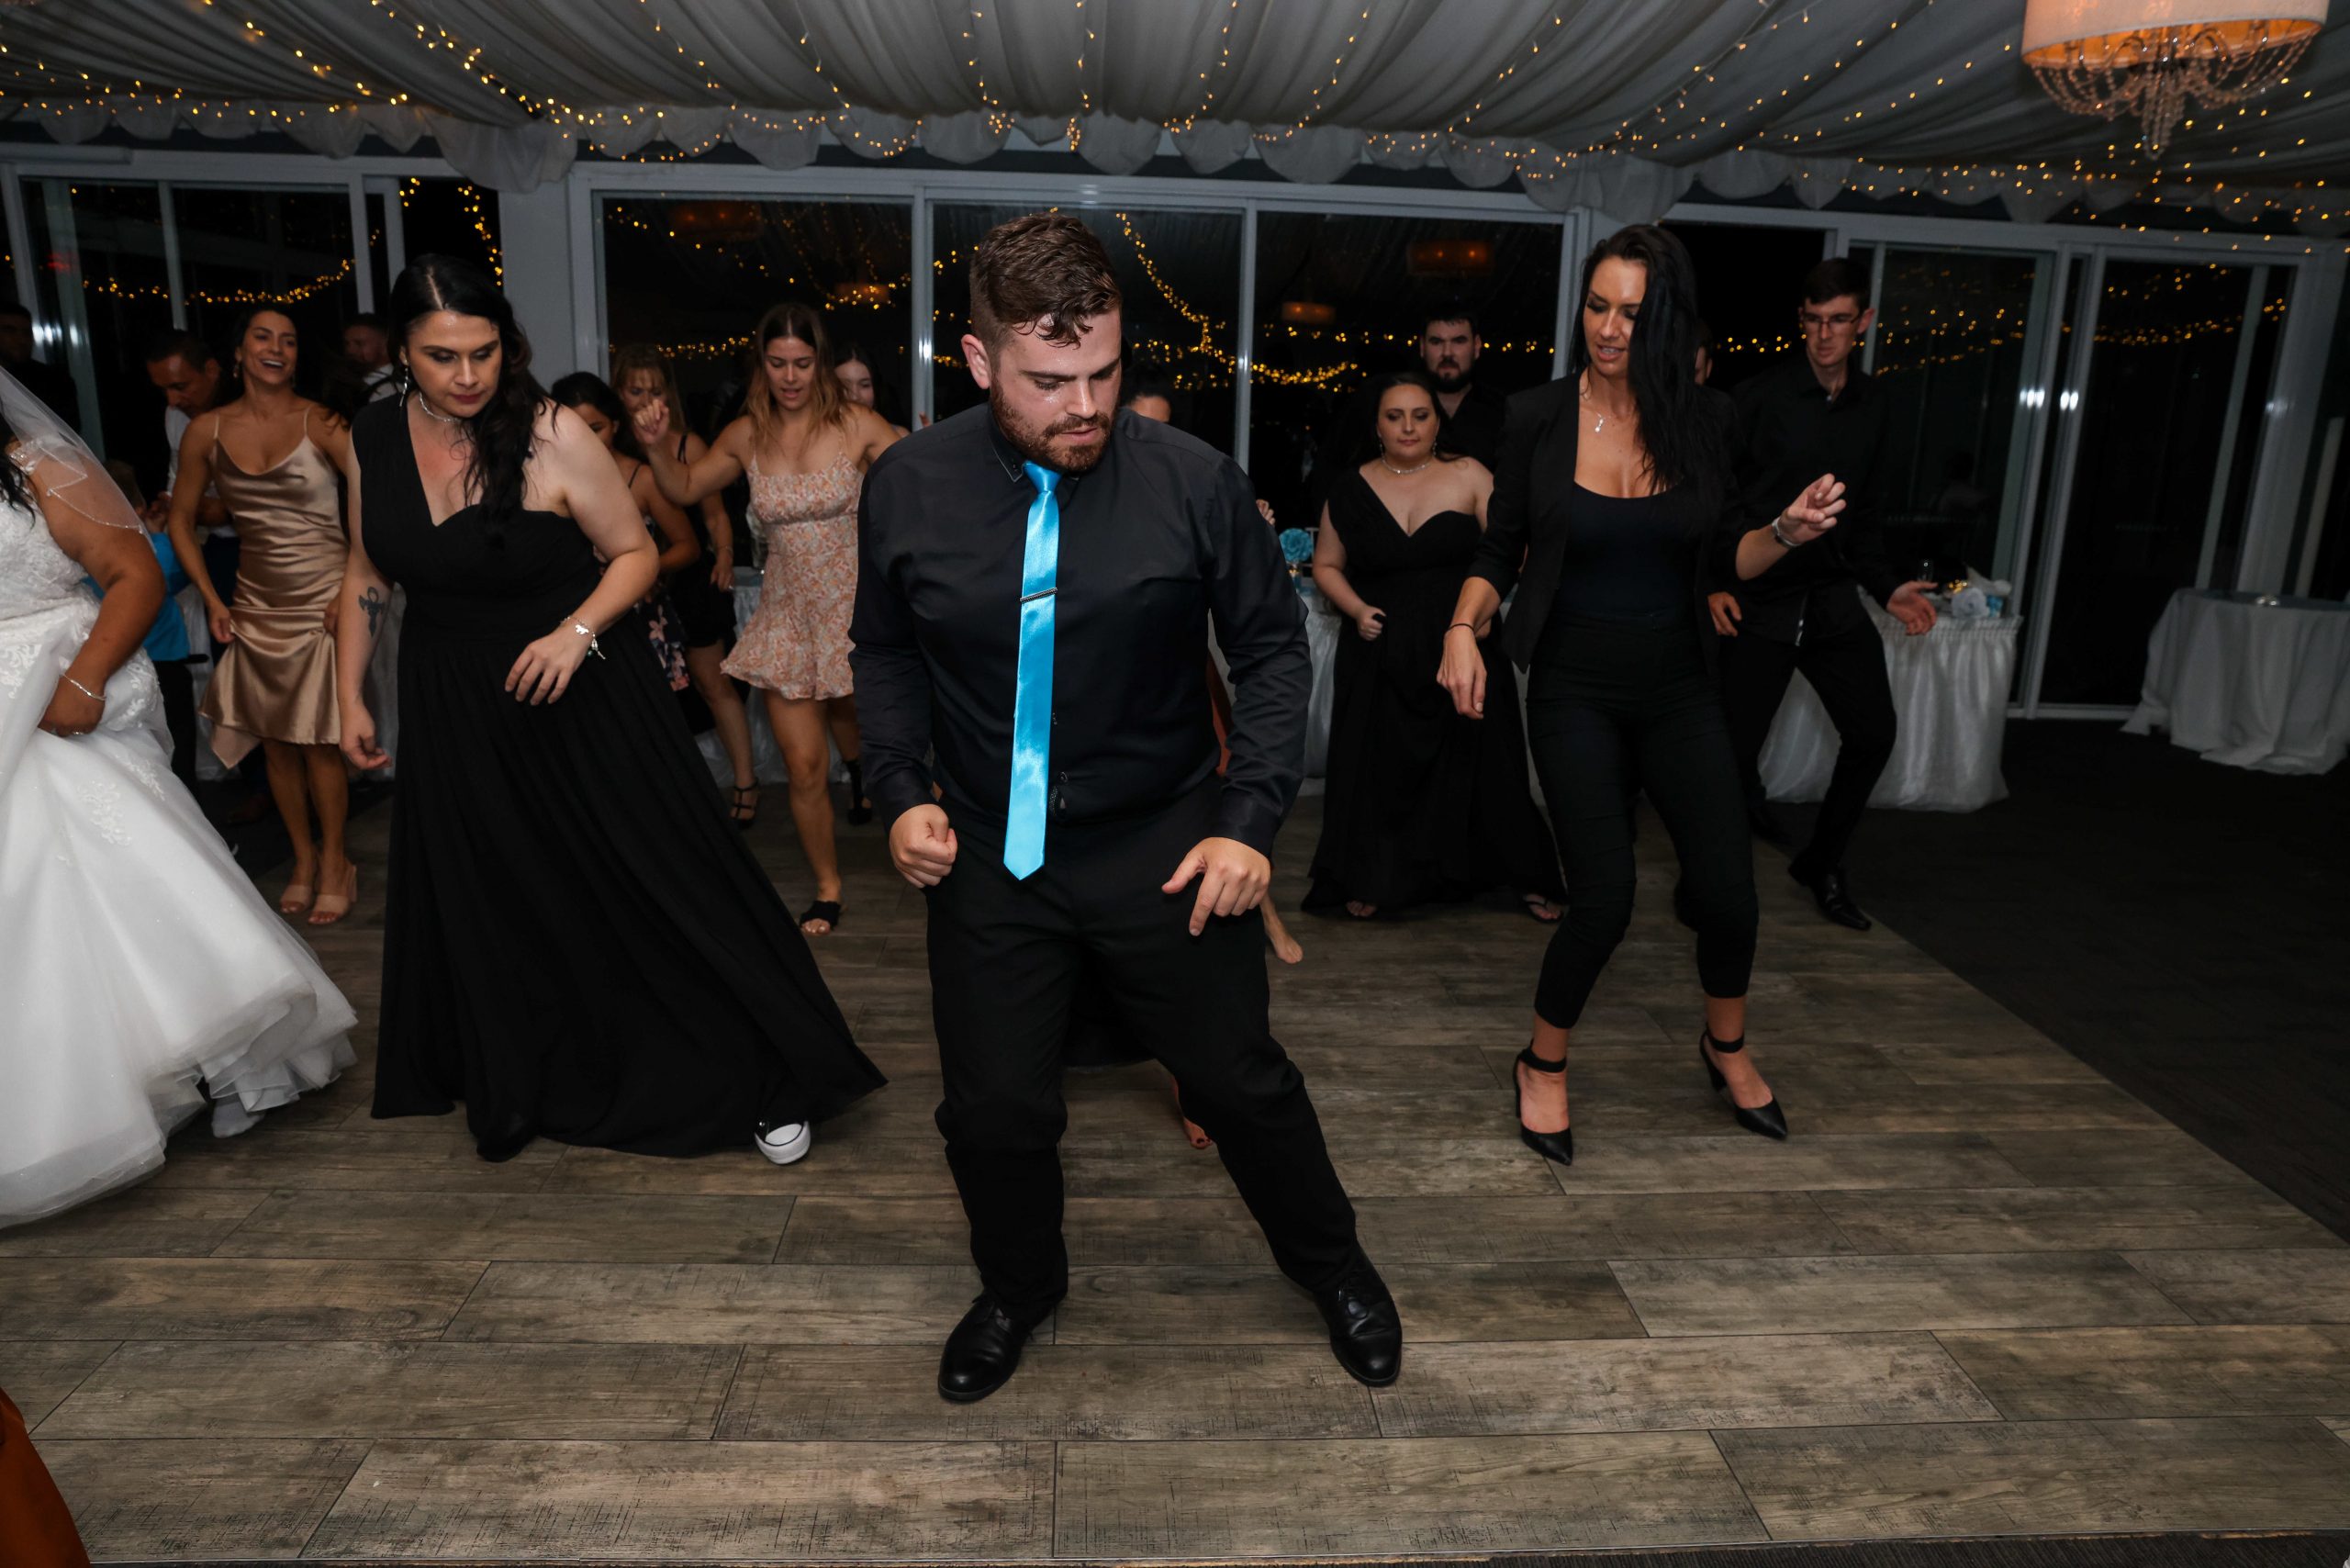 Nathan Cassar leading dances from the front of a packed dancefloor